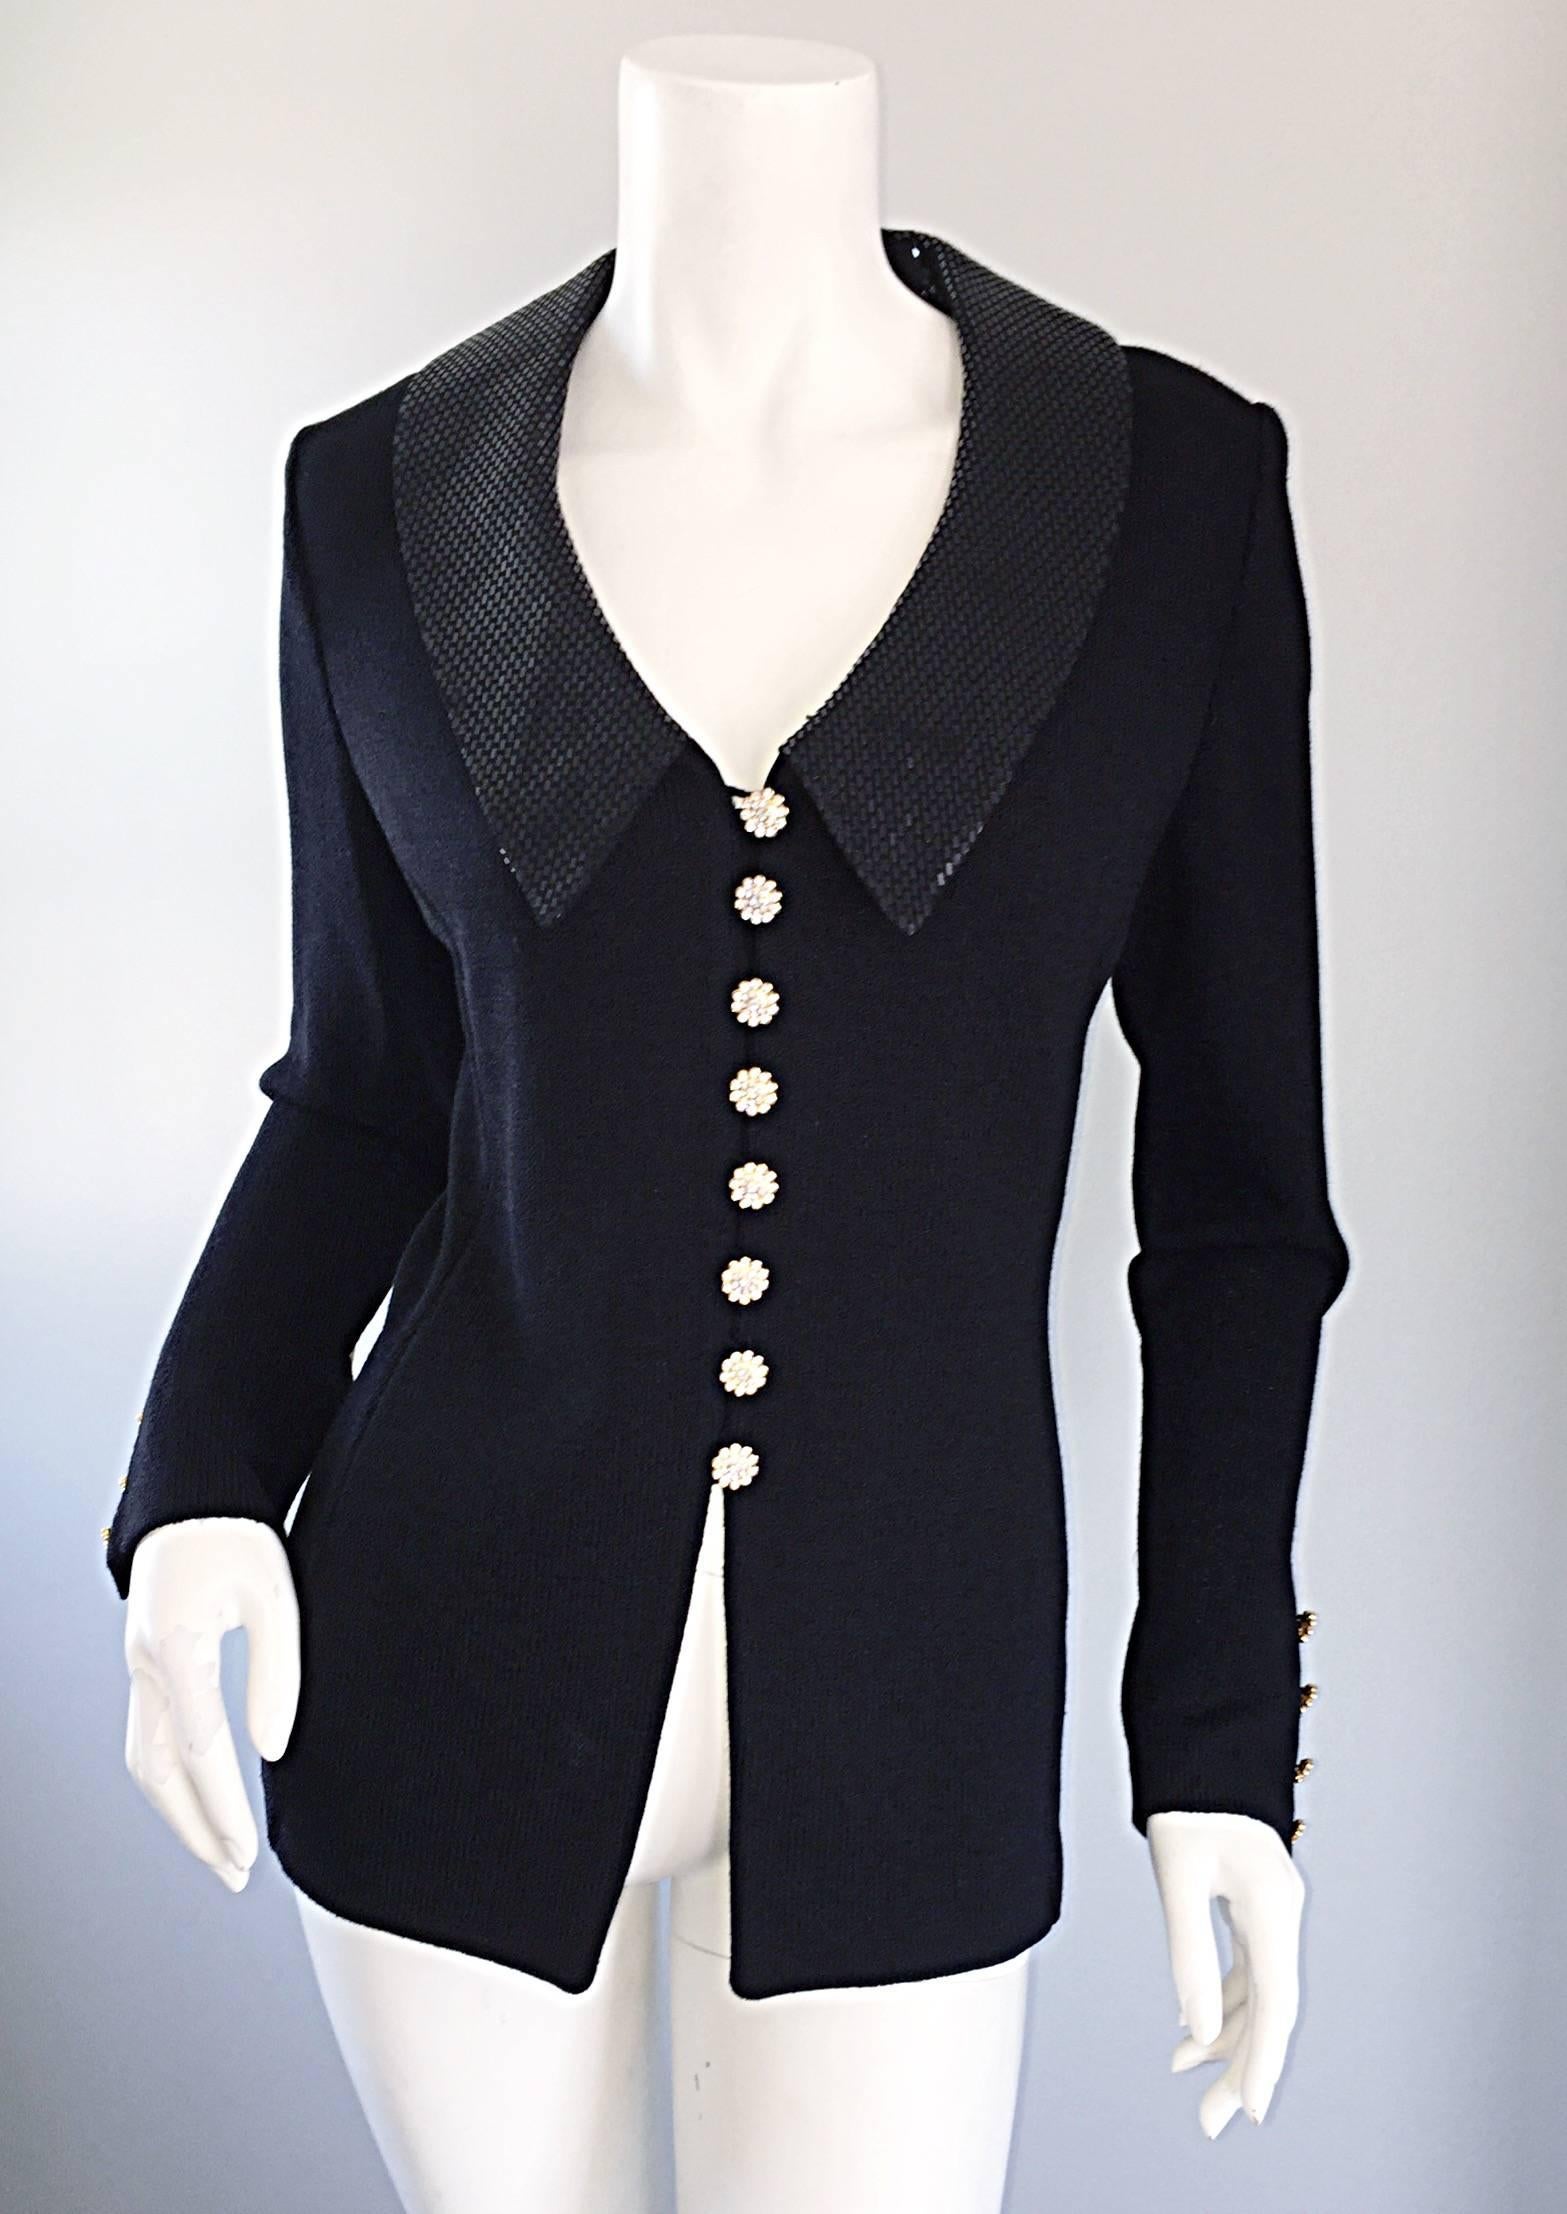 Beautiful vintage ST. JOHN EVENING by MARIE GRAY black santana knit long sleeve blazer jacket, with removable sequined collar! Features functional rhinestone buttons up the bodice, and four matching rhinestone buttons up each sleeve cuff. Collar can